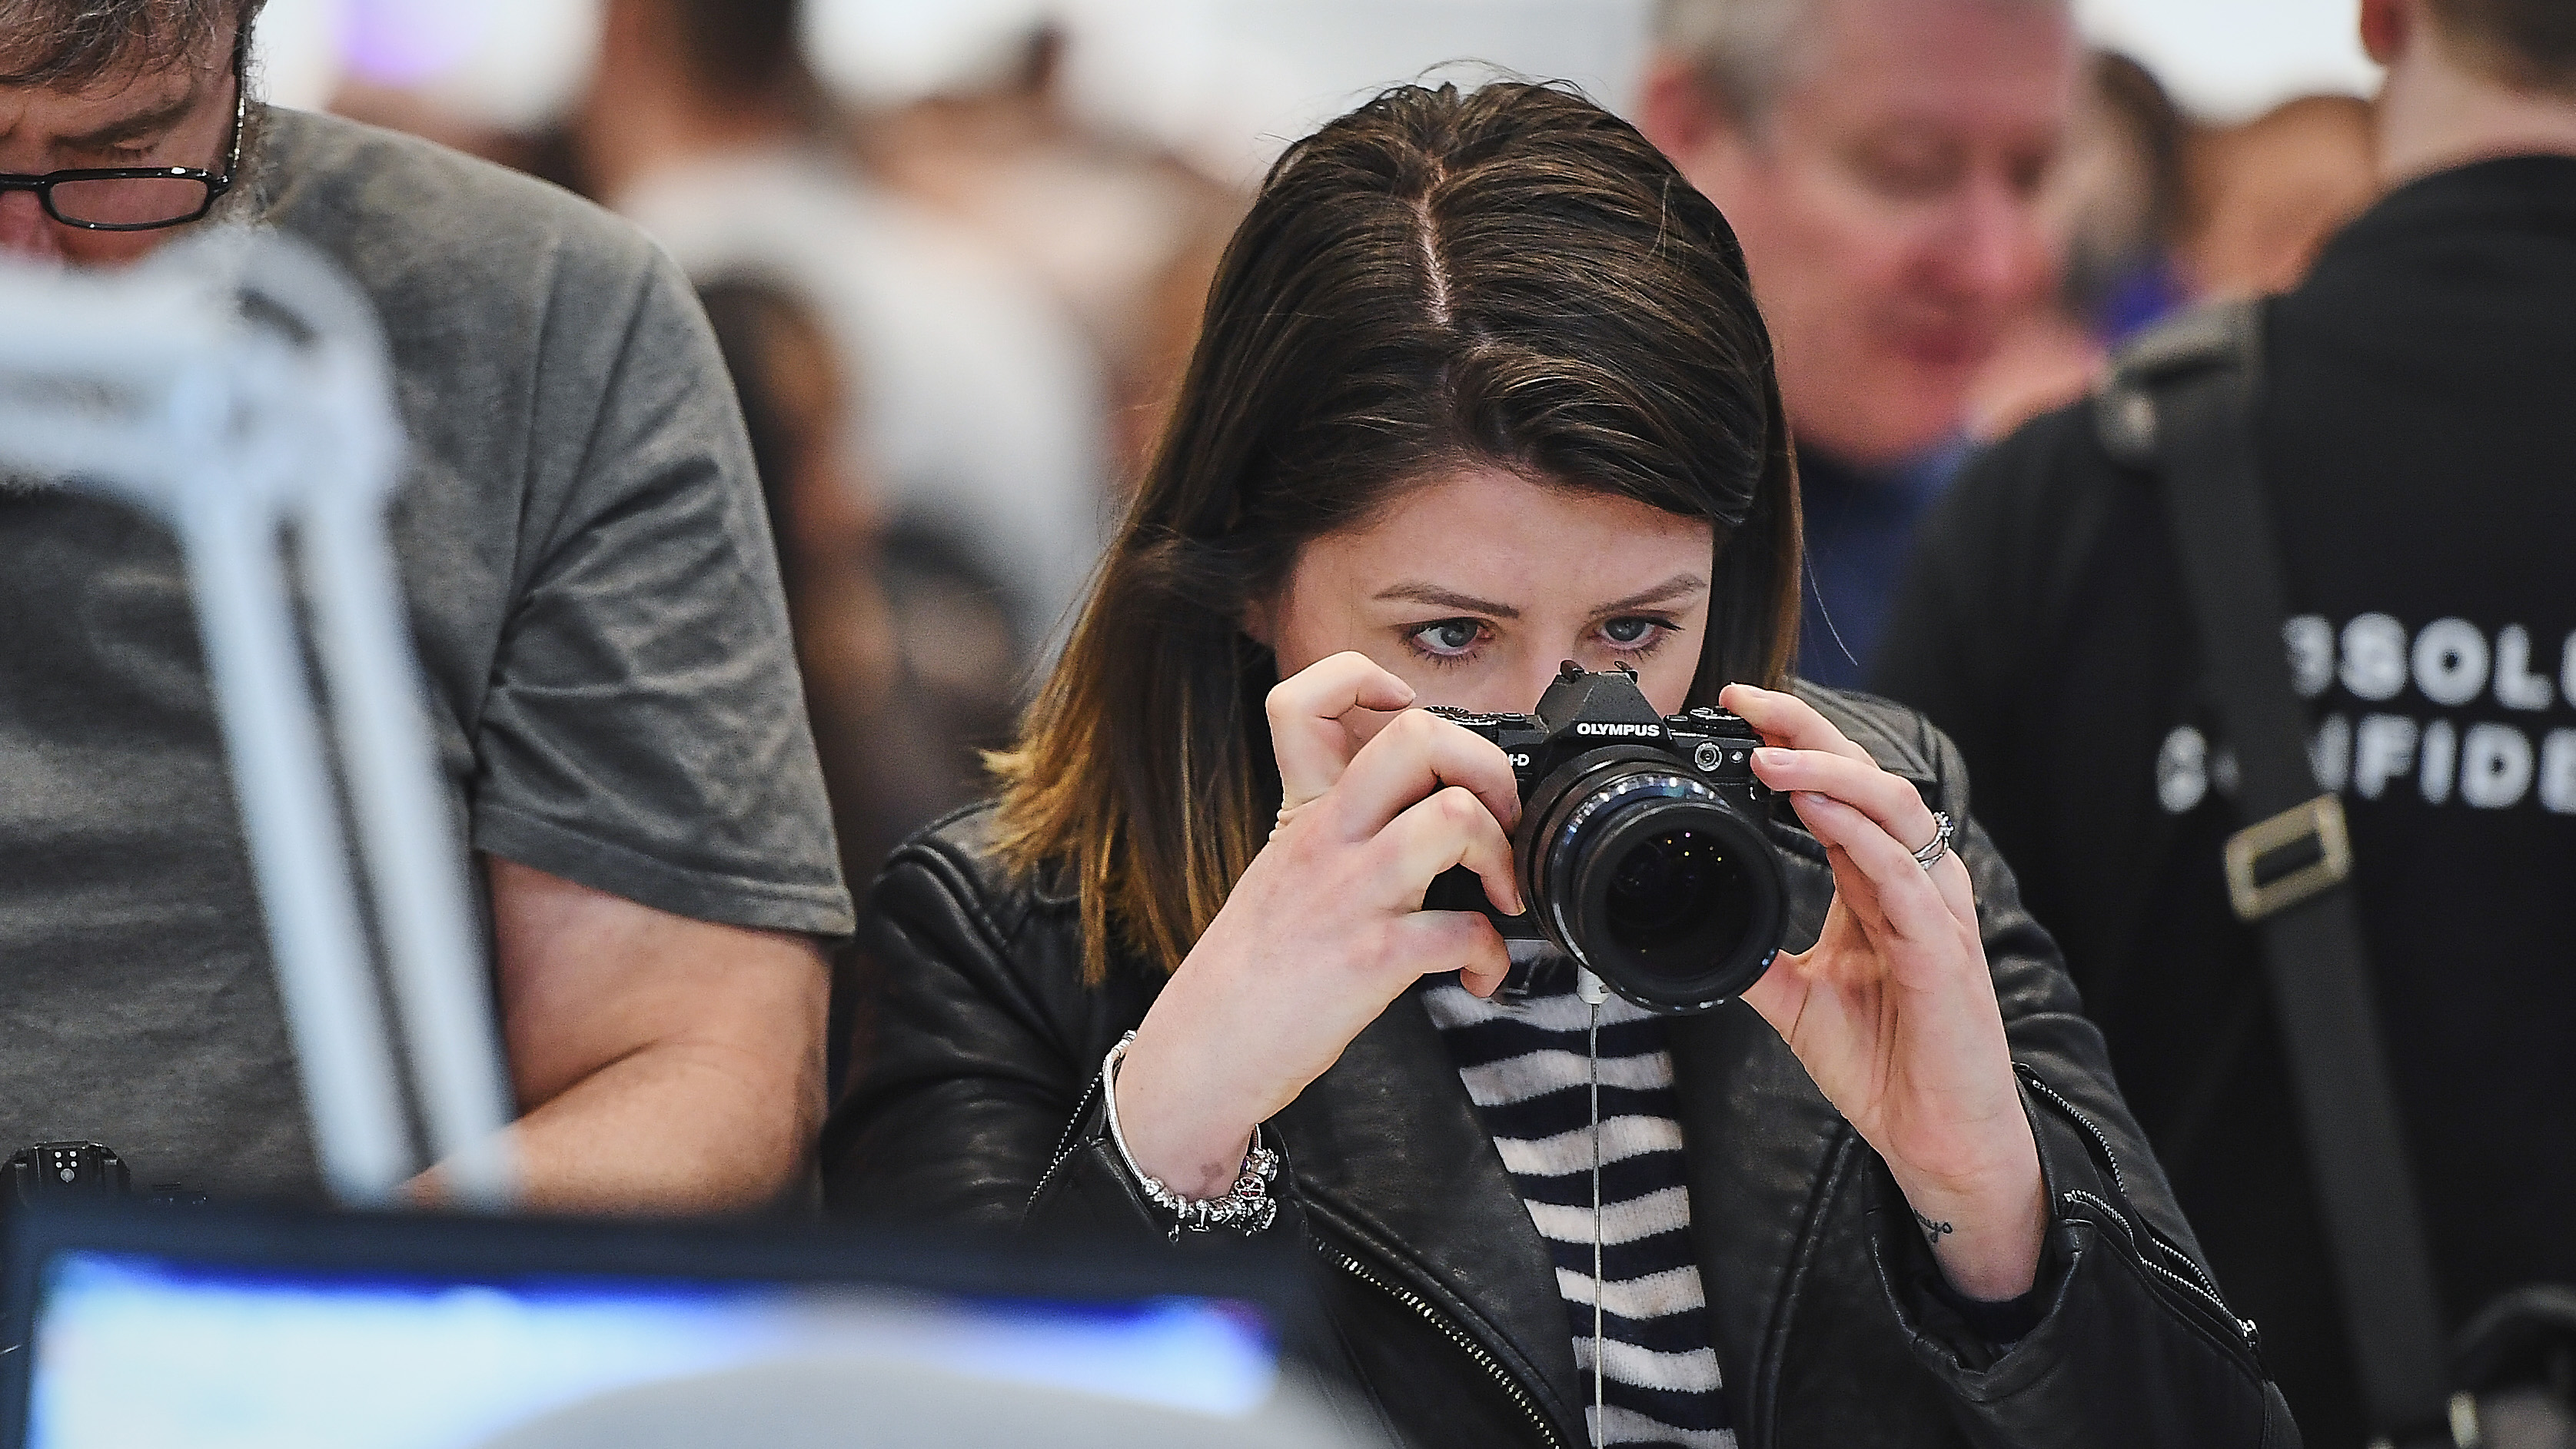 The Photography Show 2021 All The Highlights Of This Year S Show Techradar